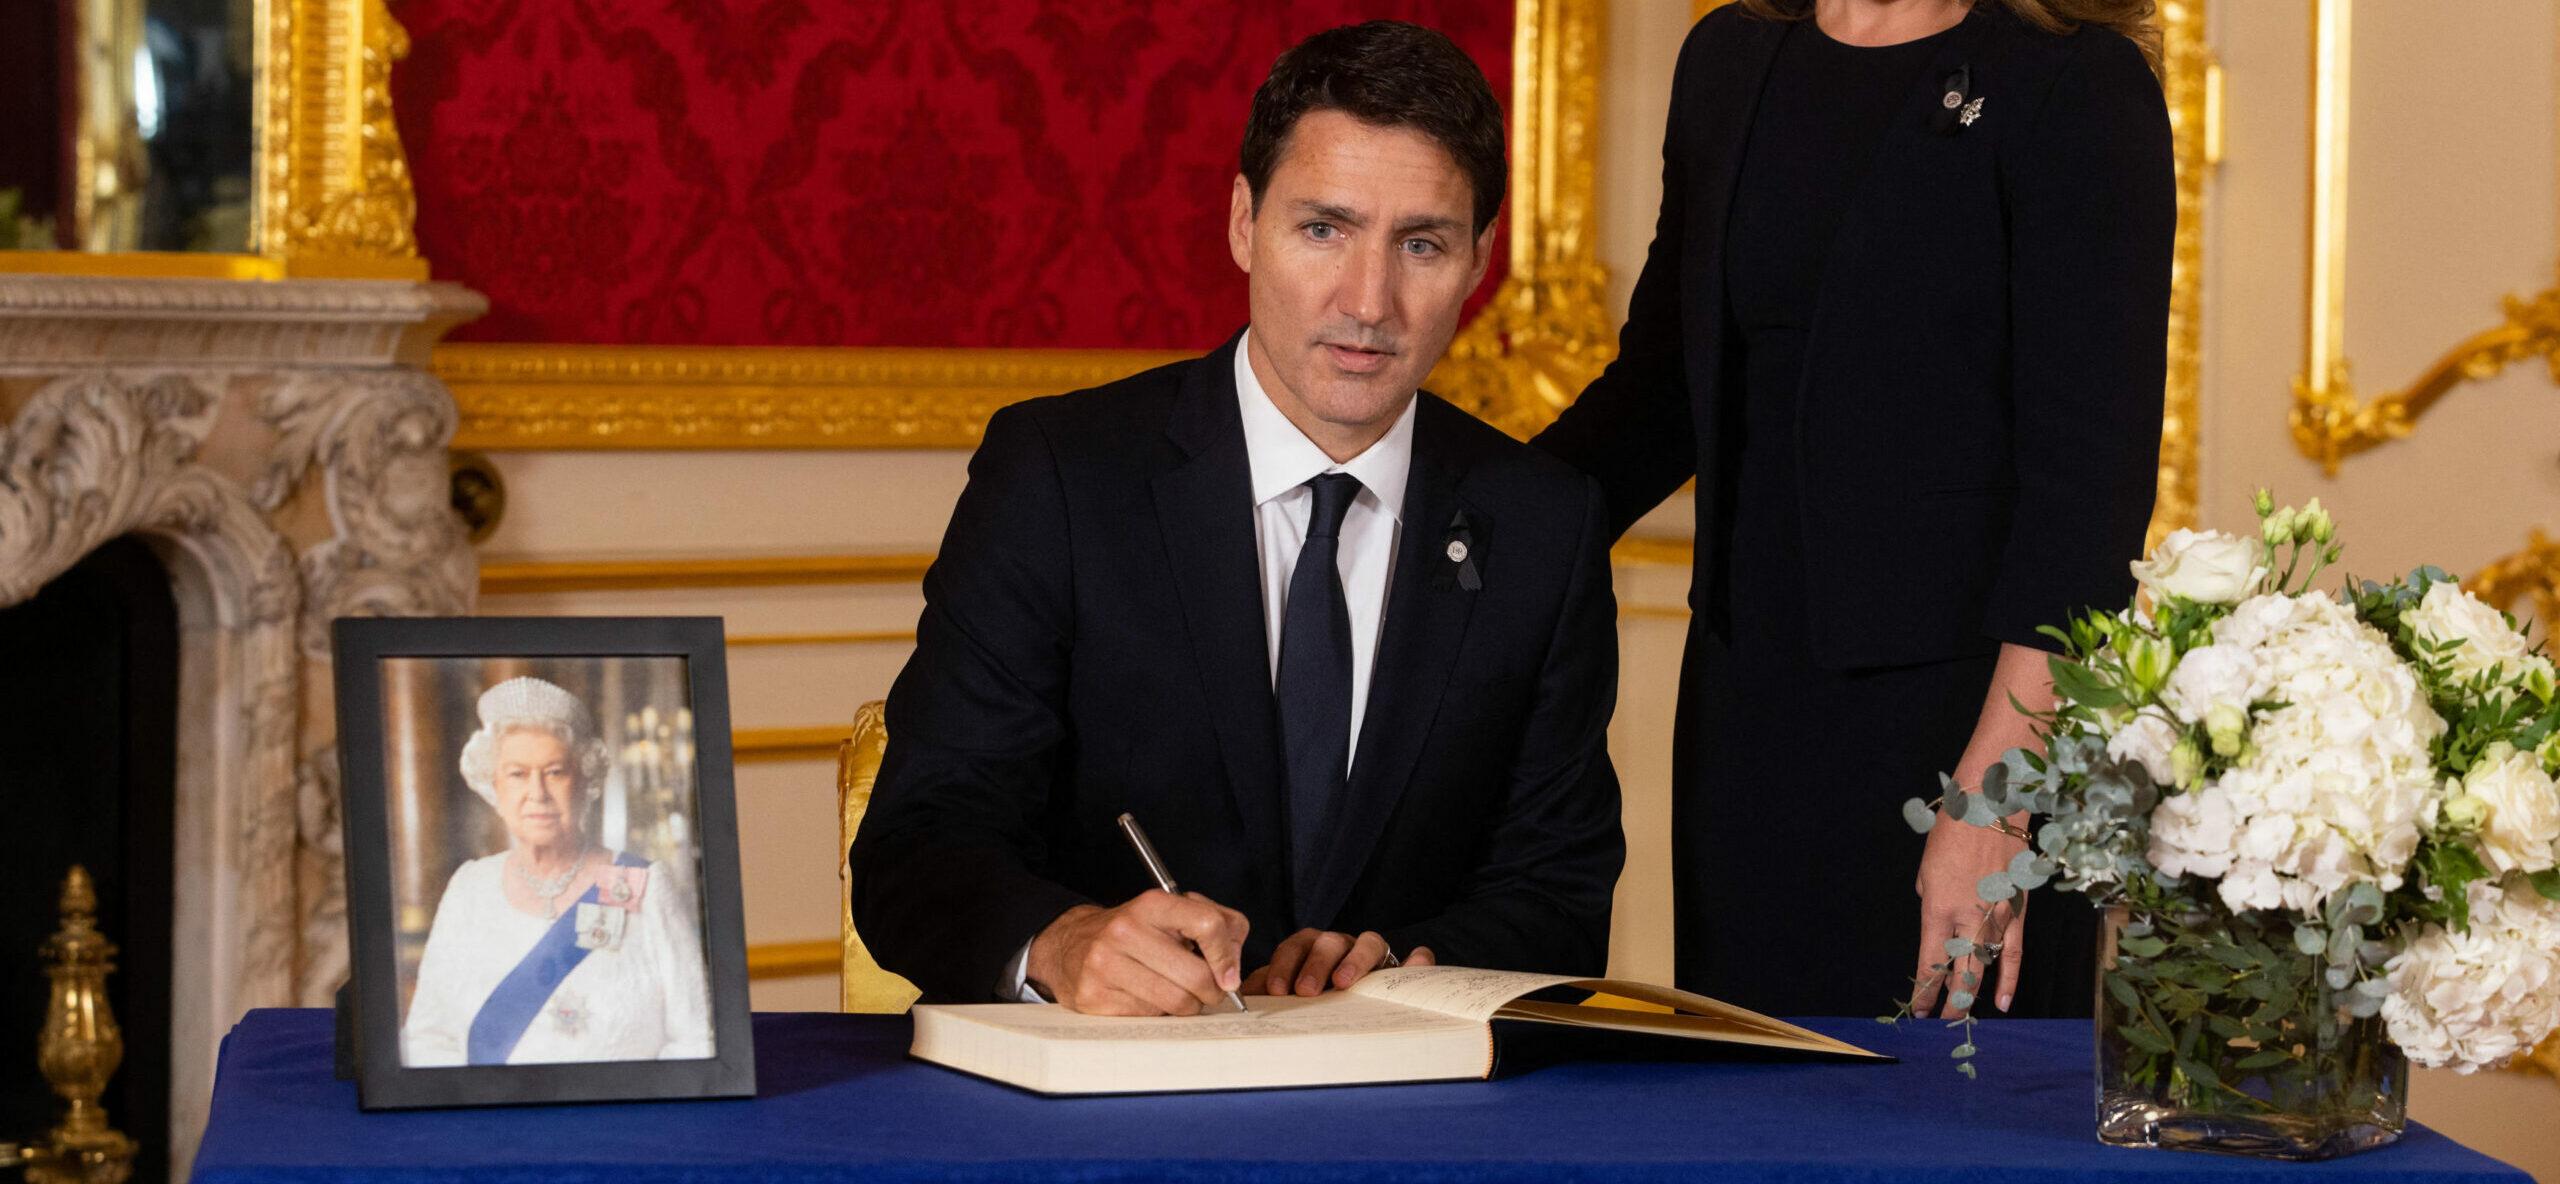 Prime Minister of Canada Justin Trudeau and his wife Sophe Trudeau sign a book of condolence at Lancaster House in London following the death of Queen Elizabeth II